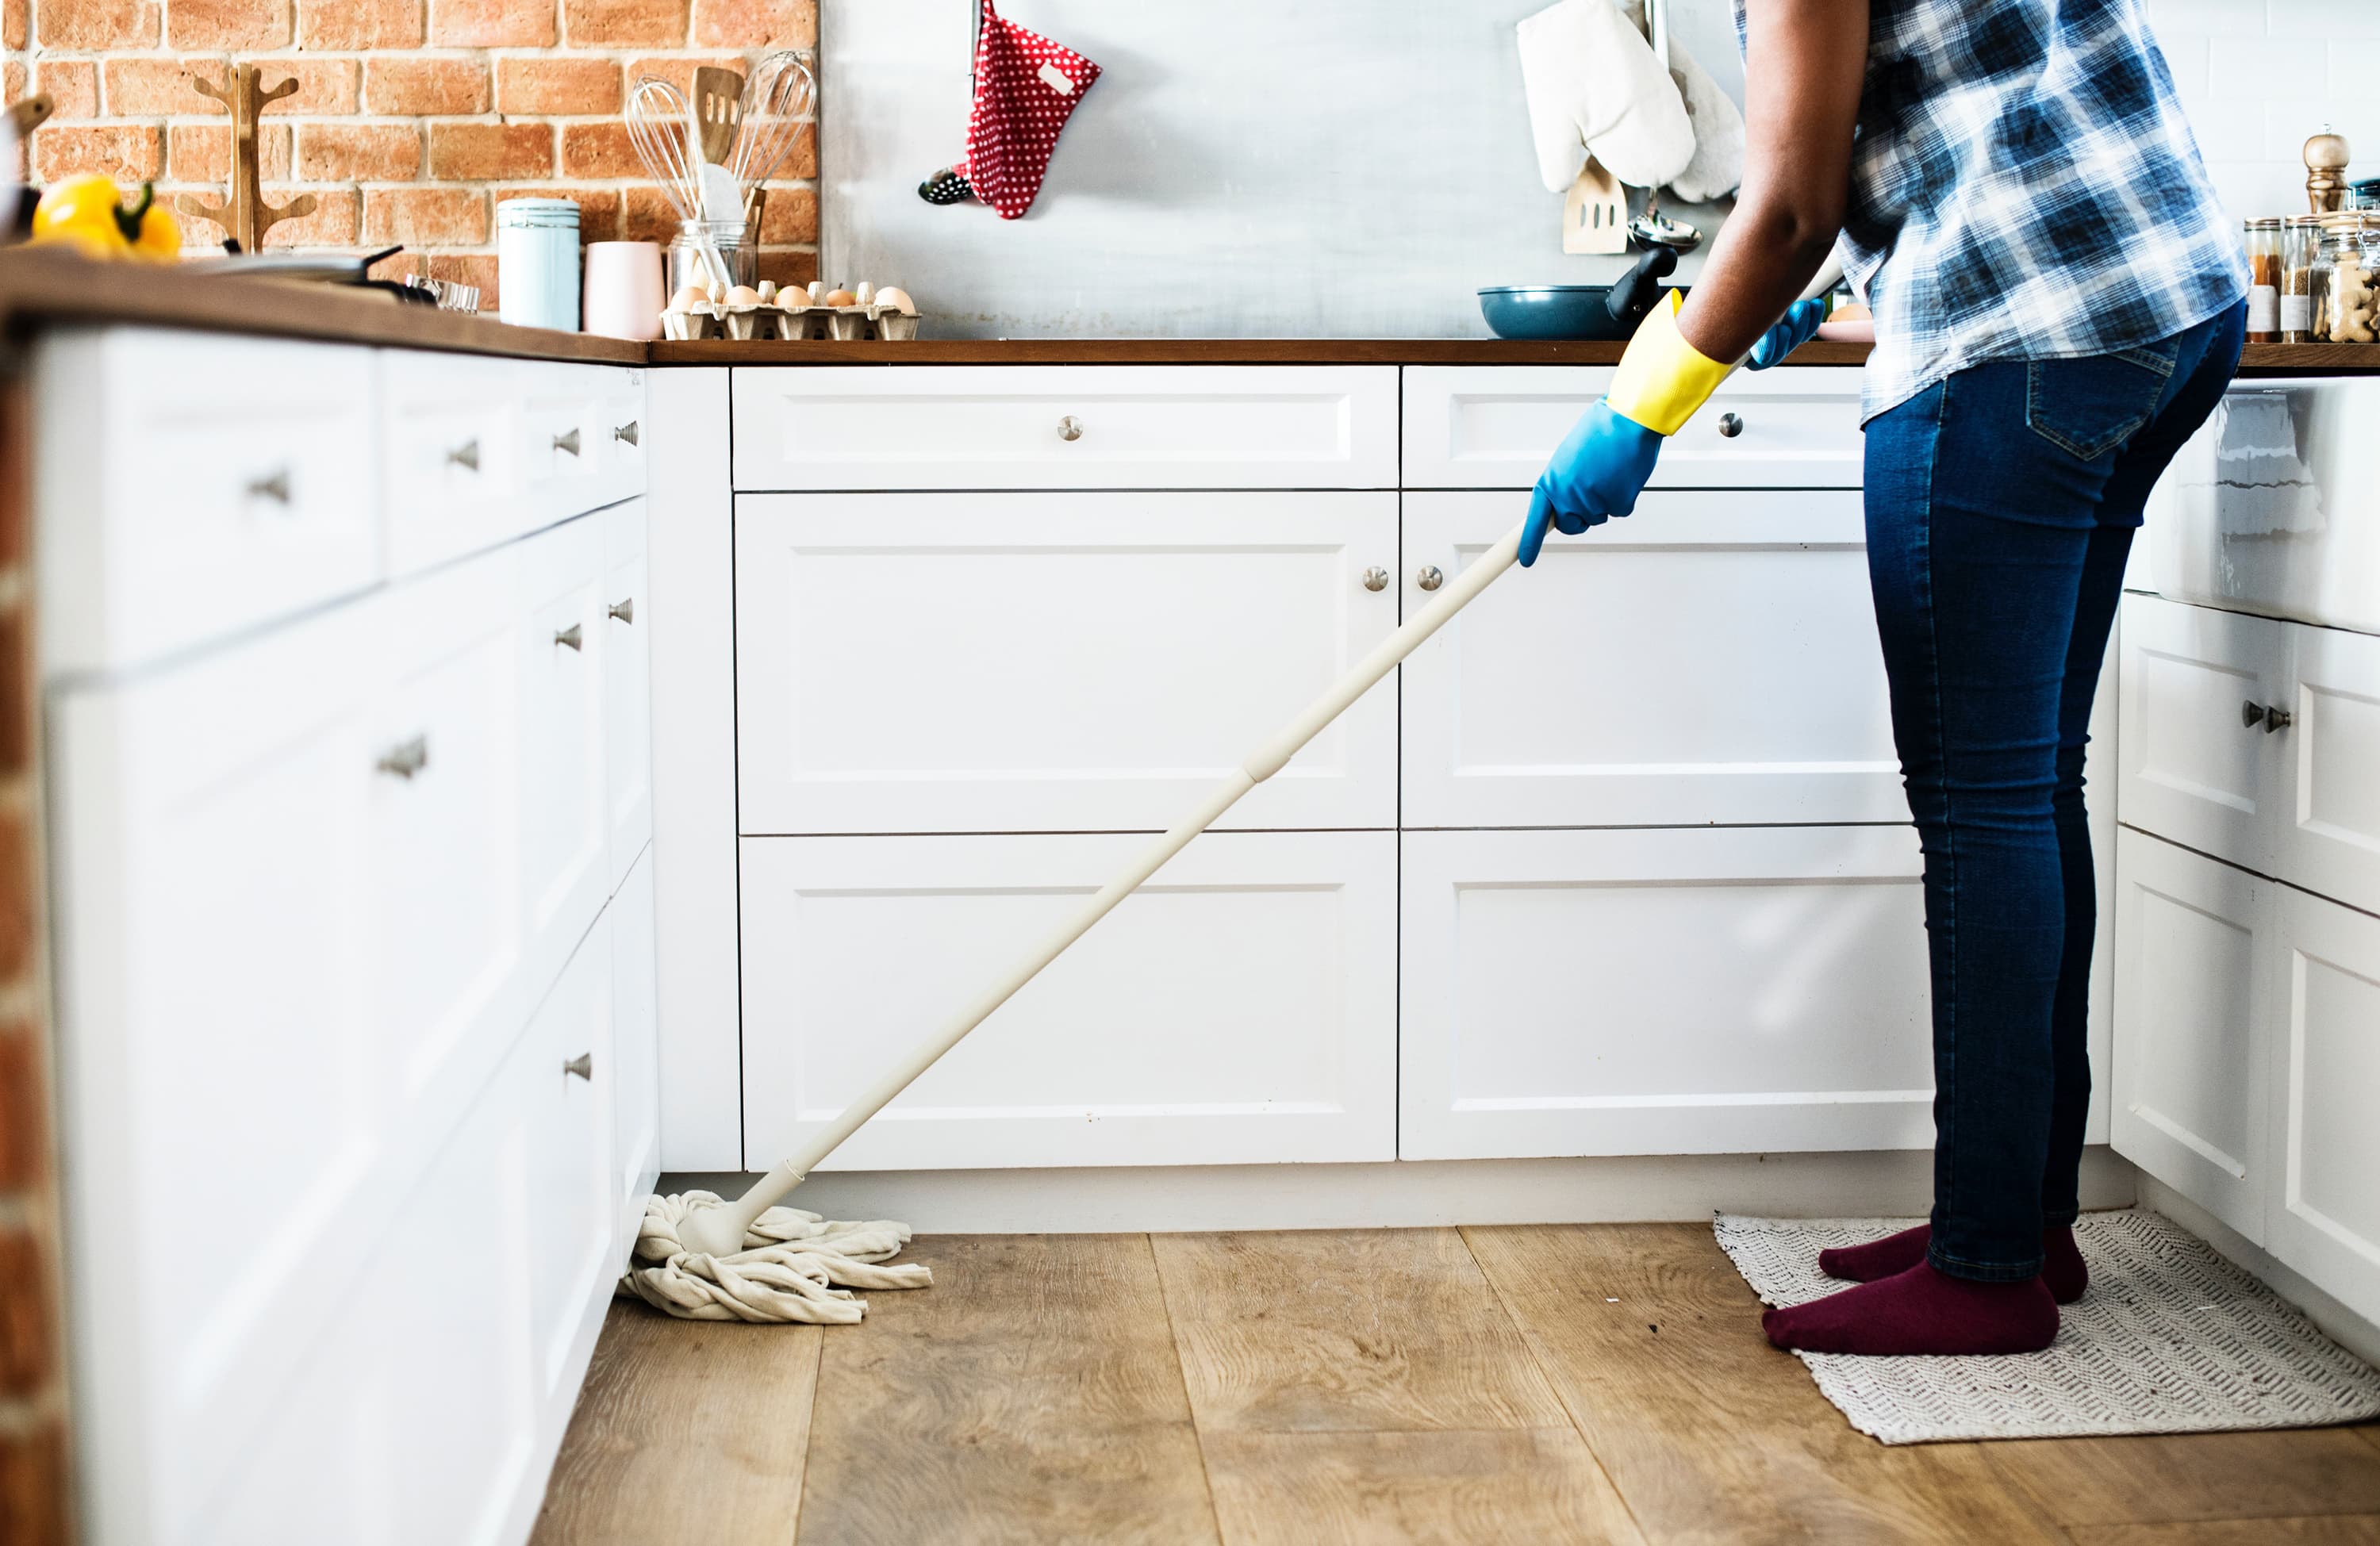 How to Clean and Disinfect Floors: Best Products, Cleaners to Use